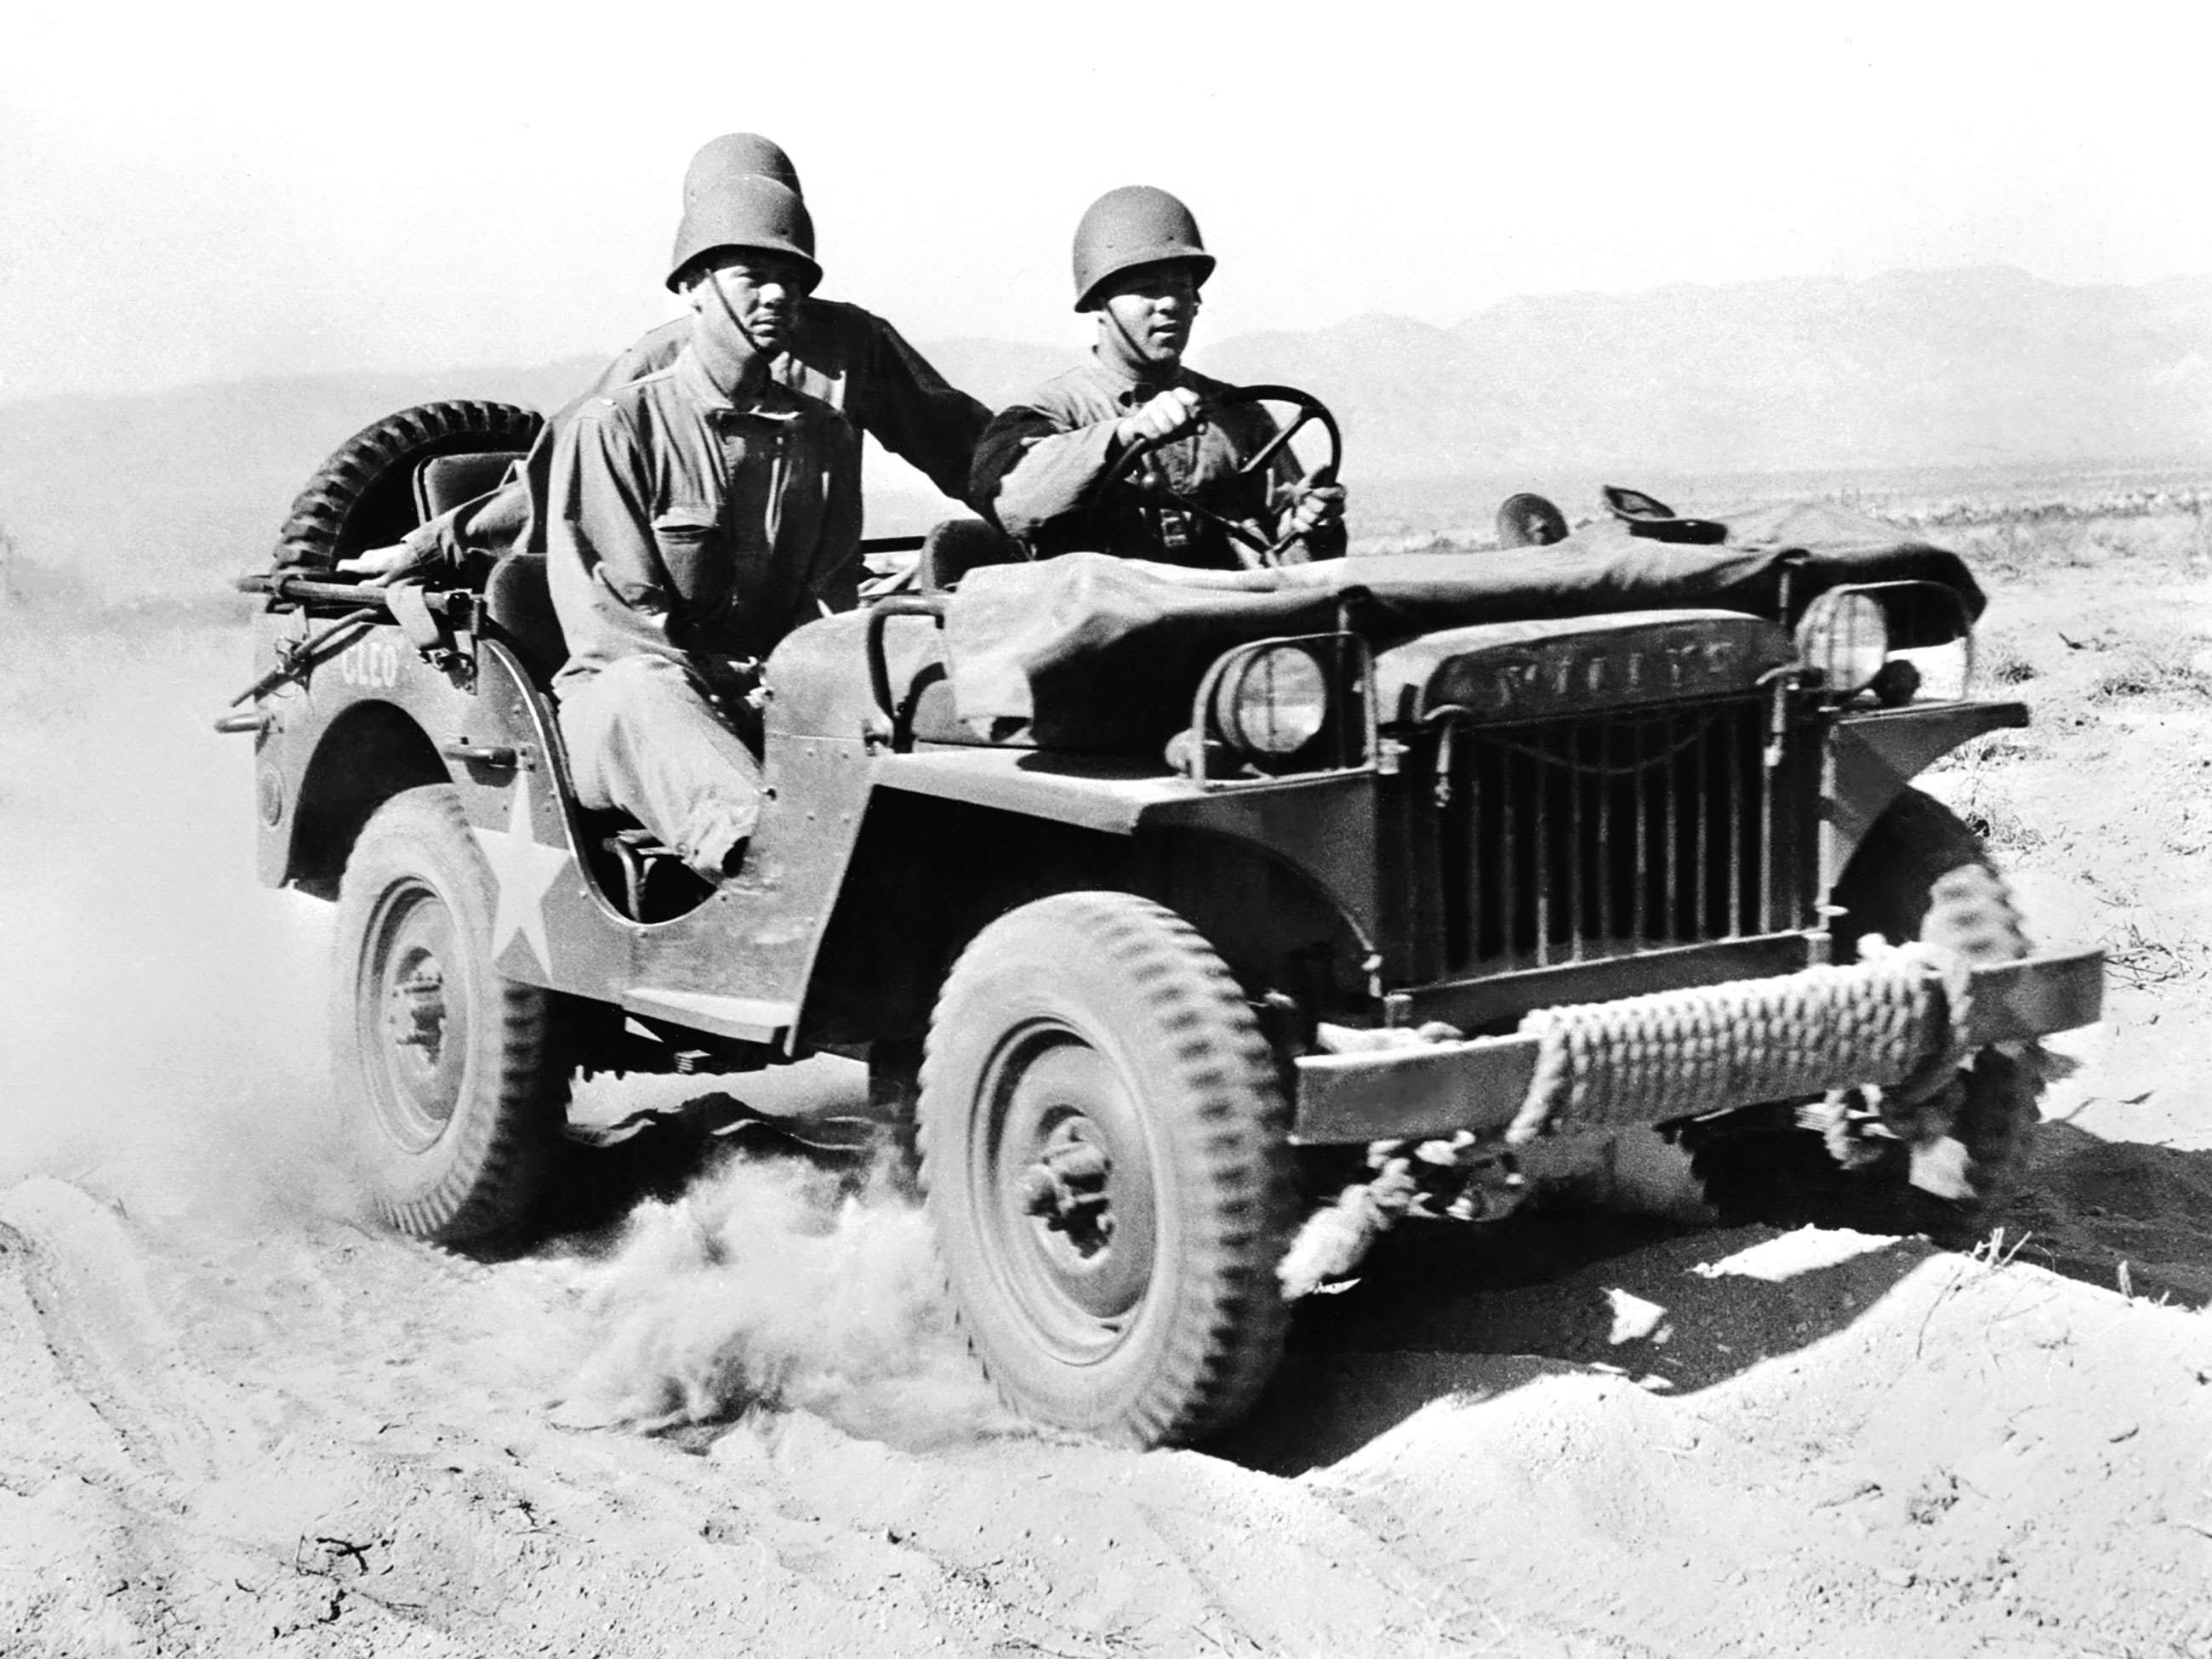 best-american-cars-ever-3-willys-ma-jeep-24012022.jpg